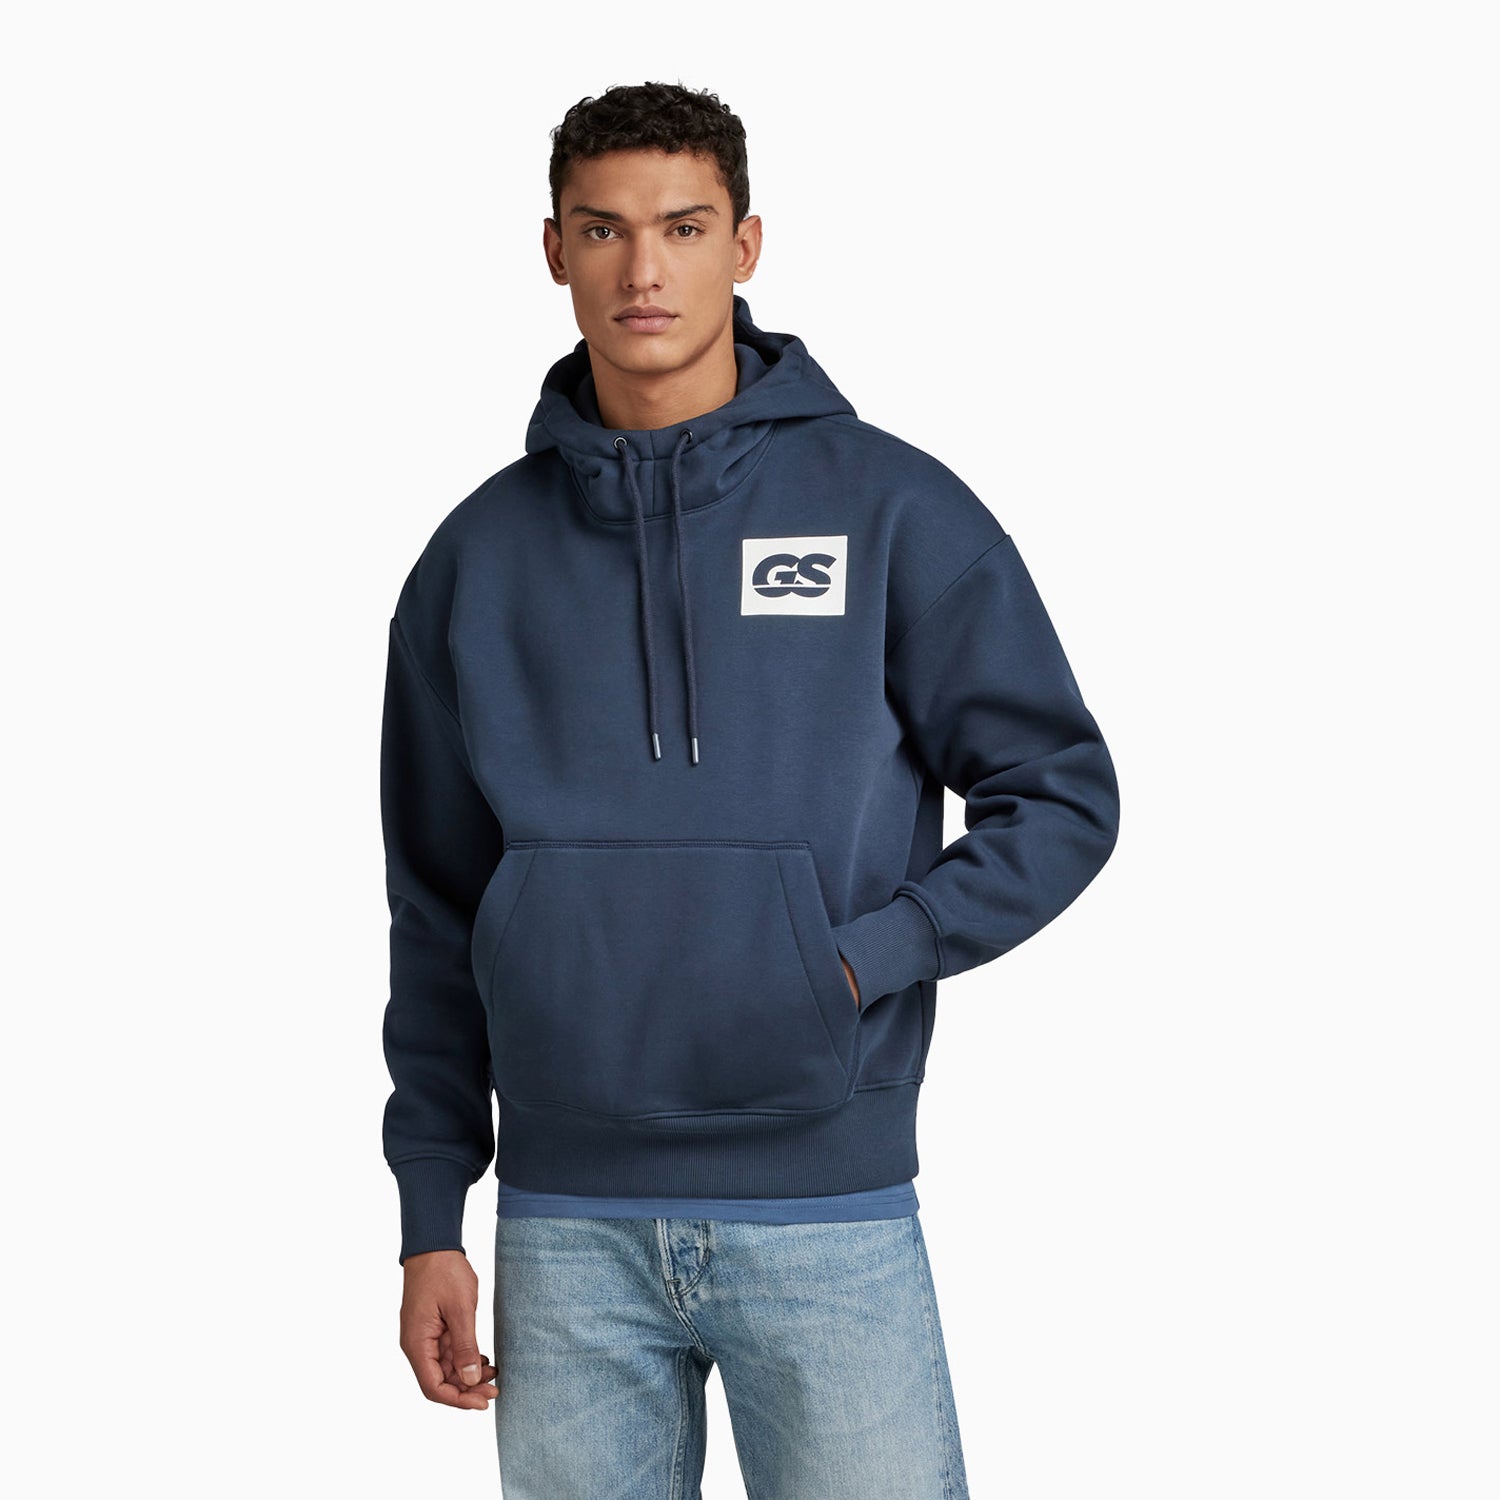 g-star-raw-mens-gs-raw-back-graphic-loose-pull-over-hoodie-d23482-d425-c742